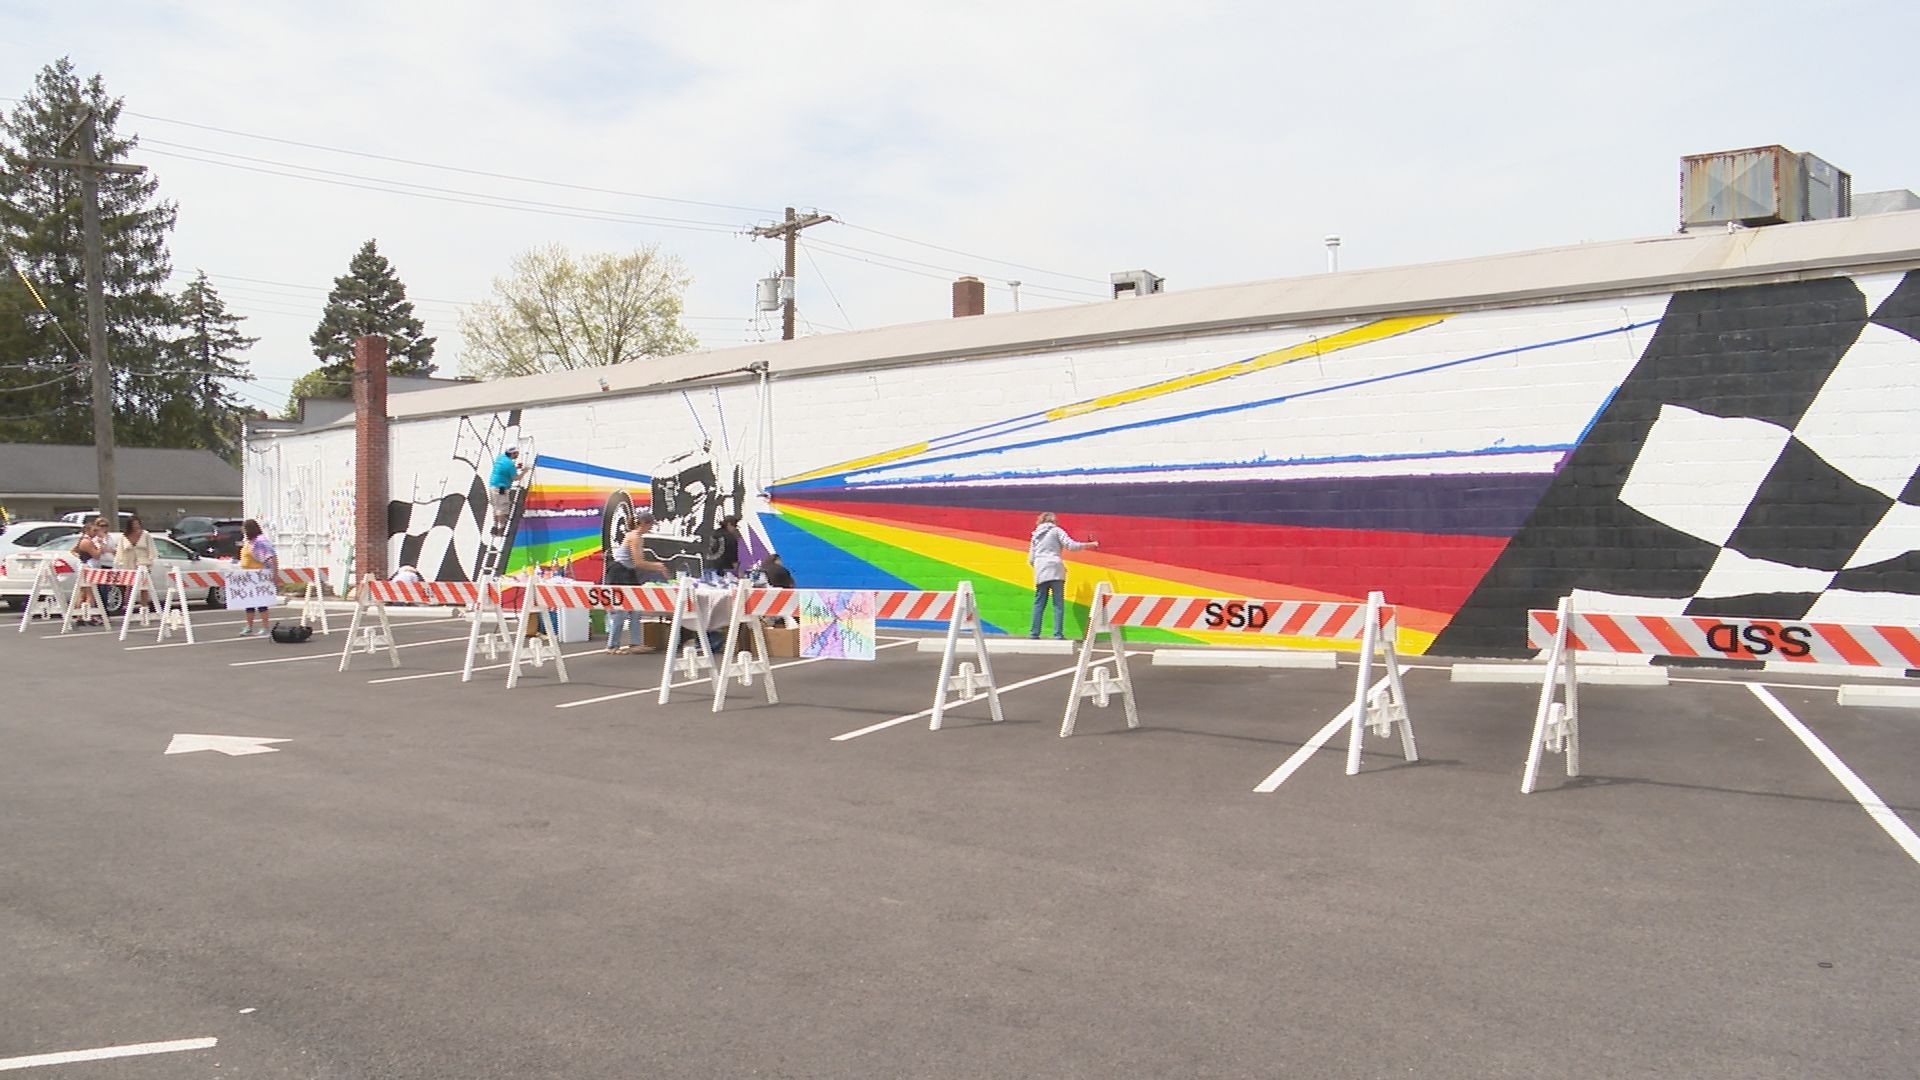 You can become a part of Speedway history by helping paint a mural on Main Street.